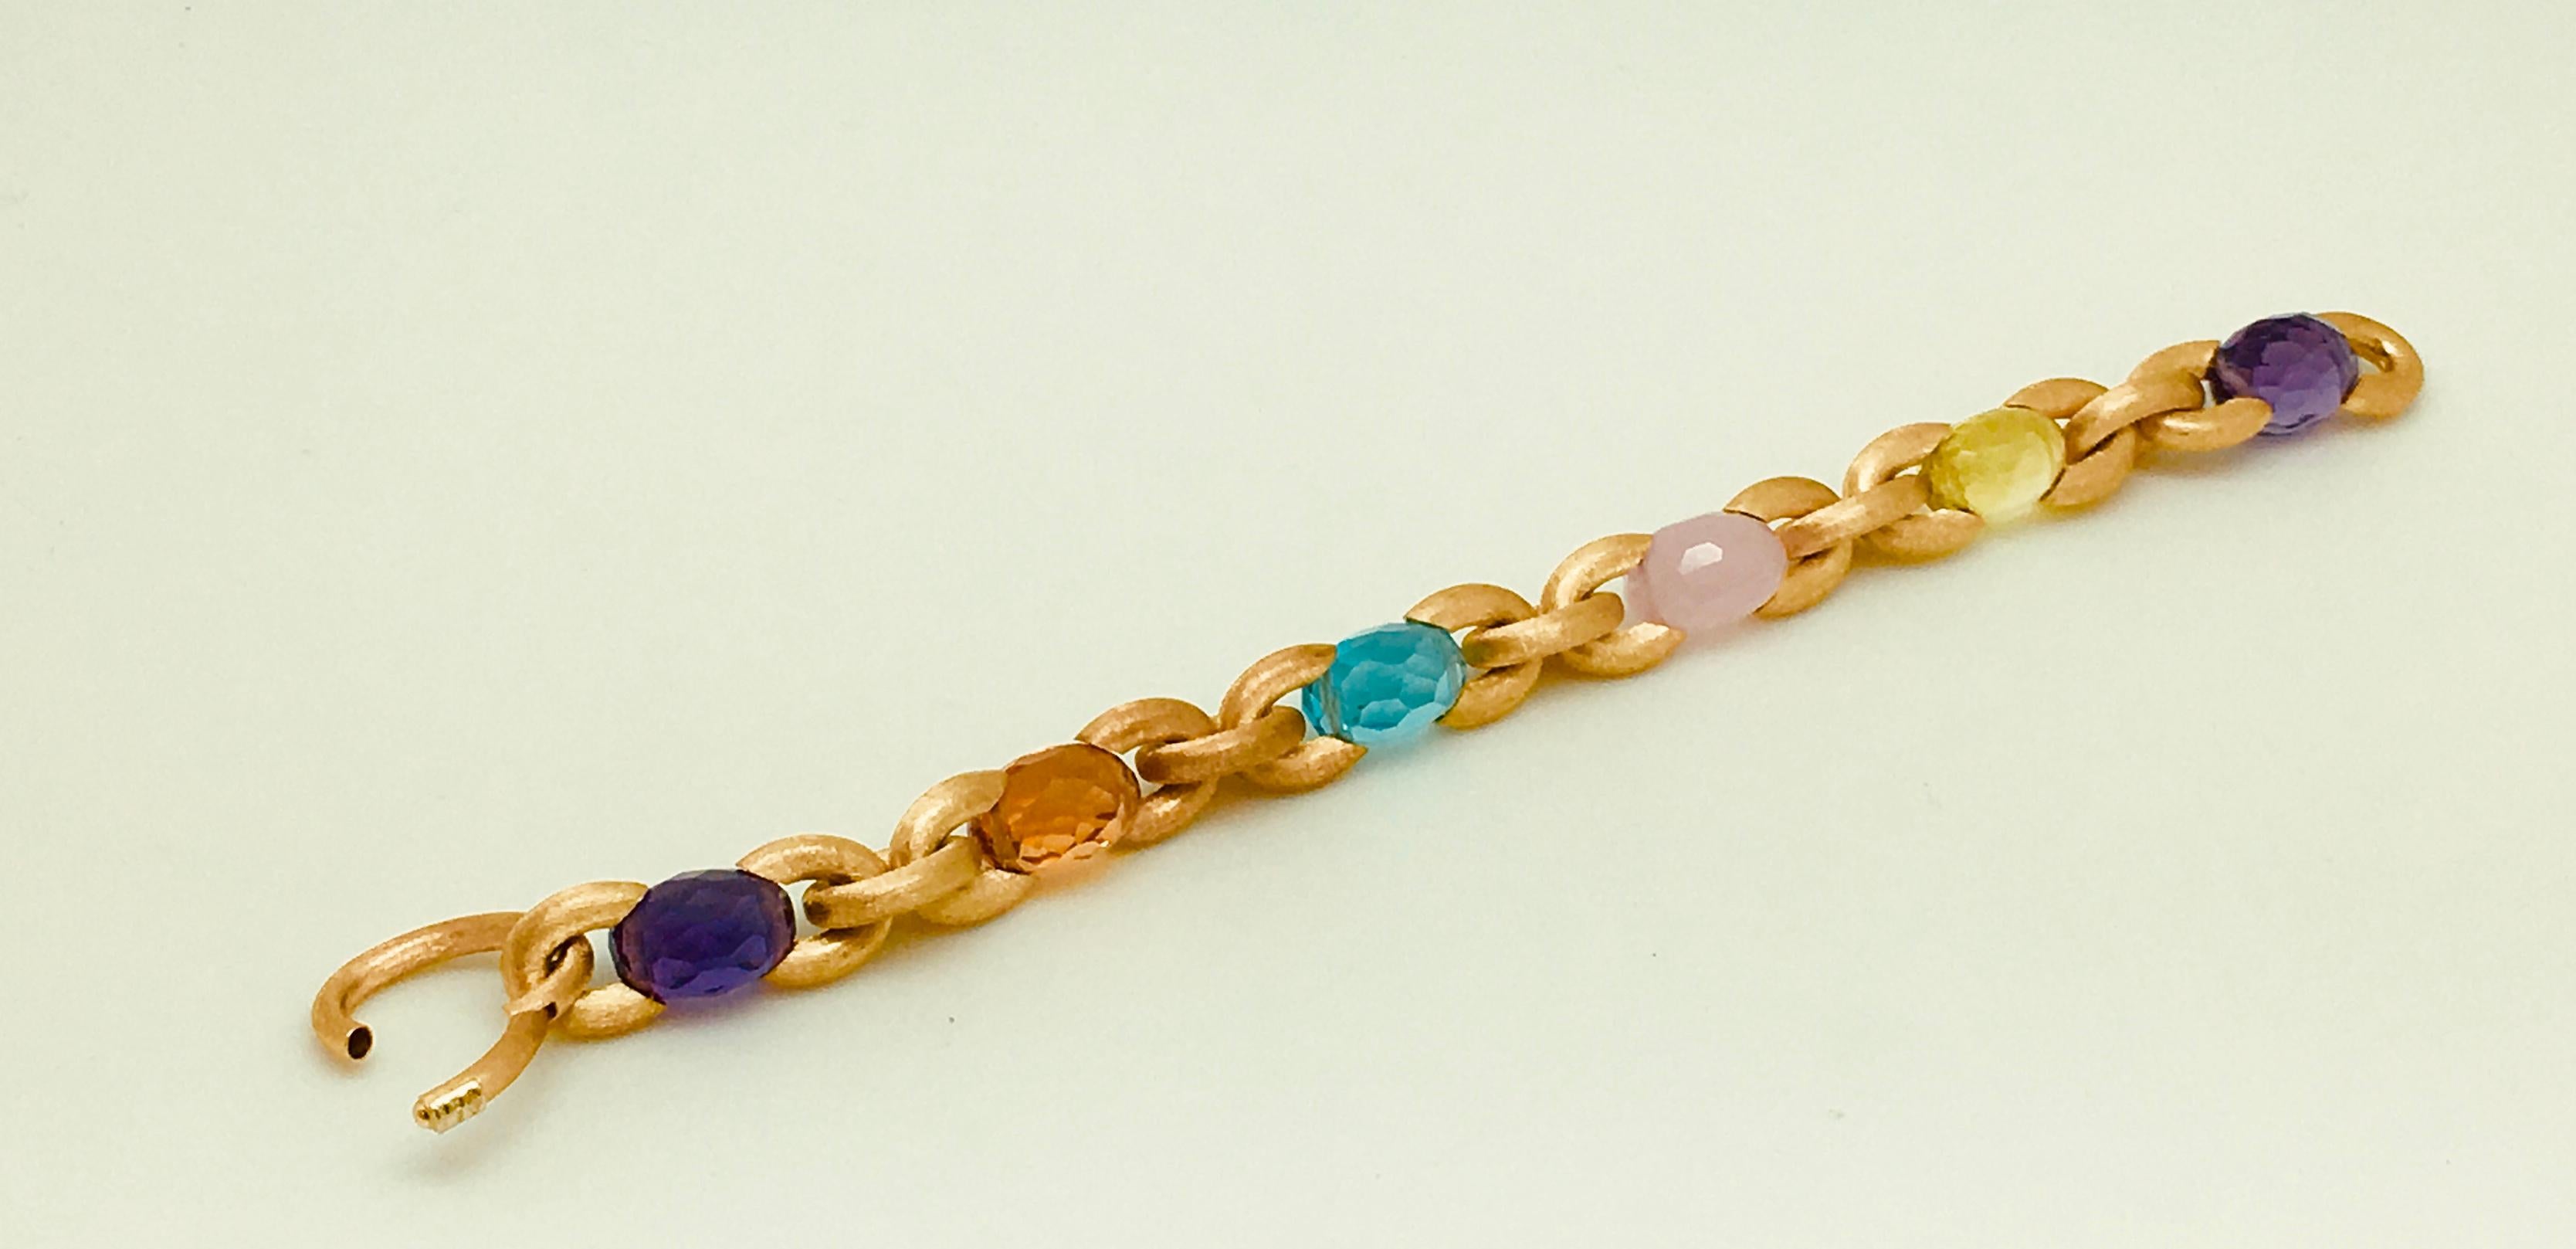 18 Karat Yellow Gold Multi-Color Stone Bracelet by Nania In Excellent Condition For Sale In Nashville, TN